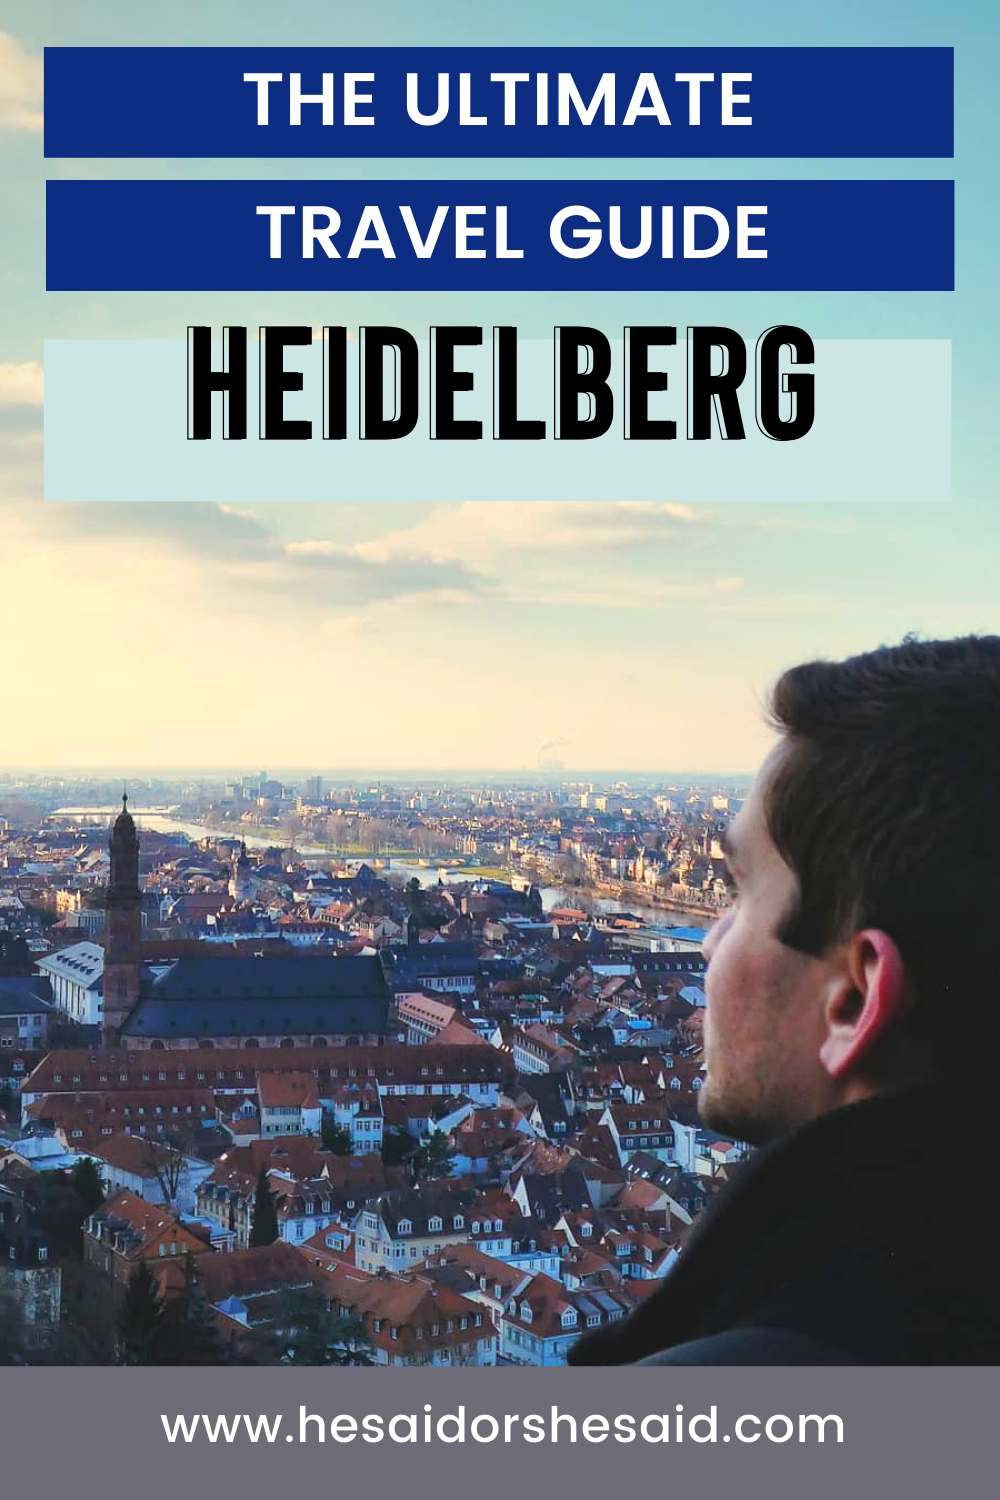 The Ultimate Travel Guide for Heidelberg by hesaidorshesaid